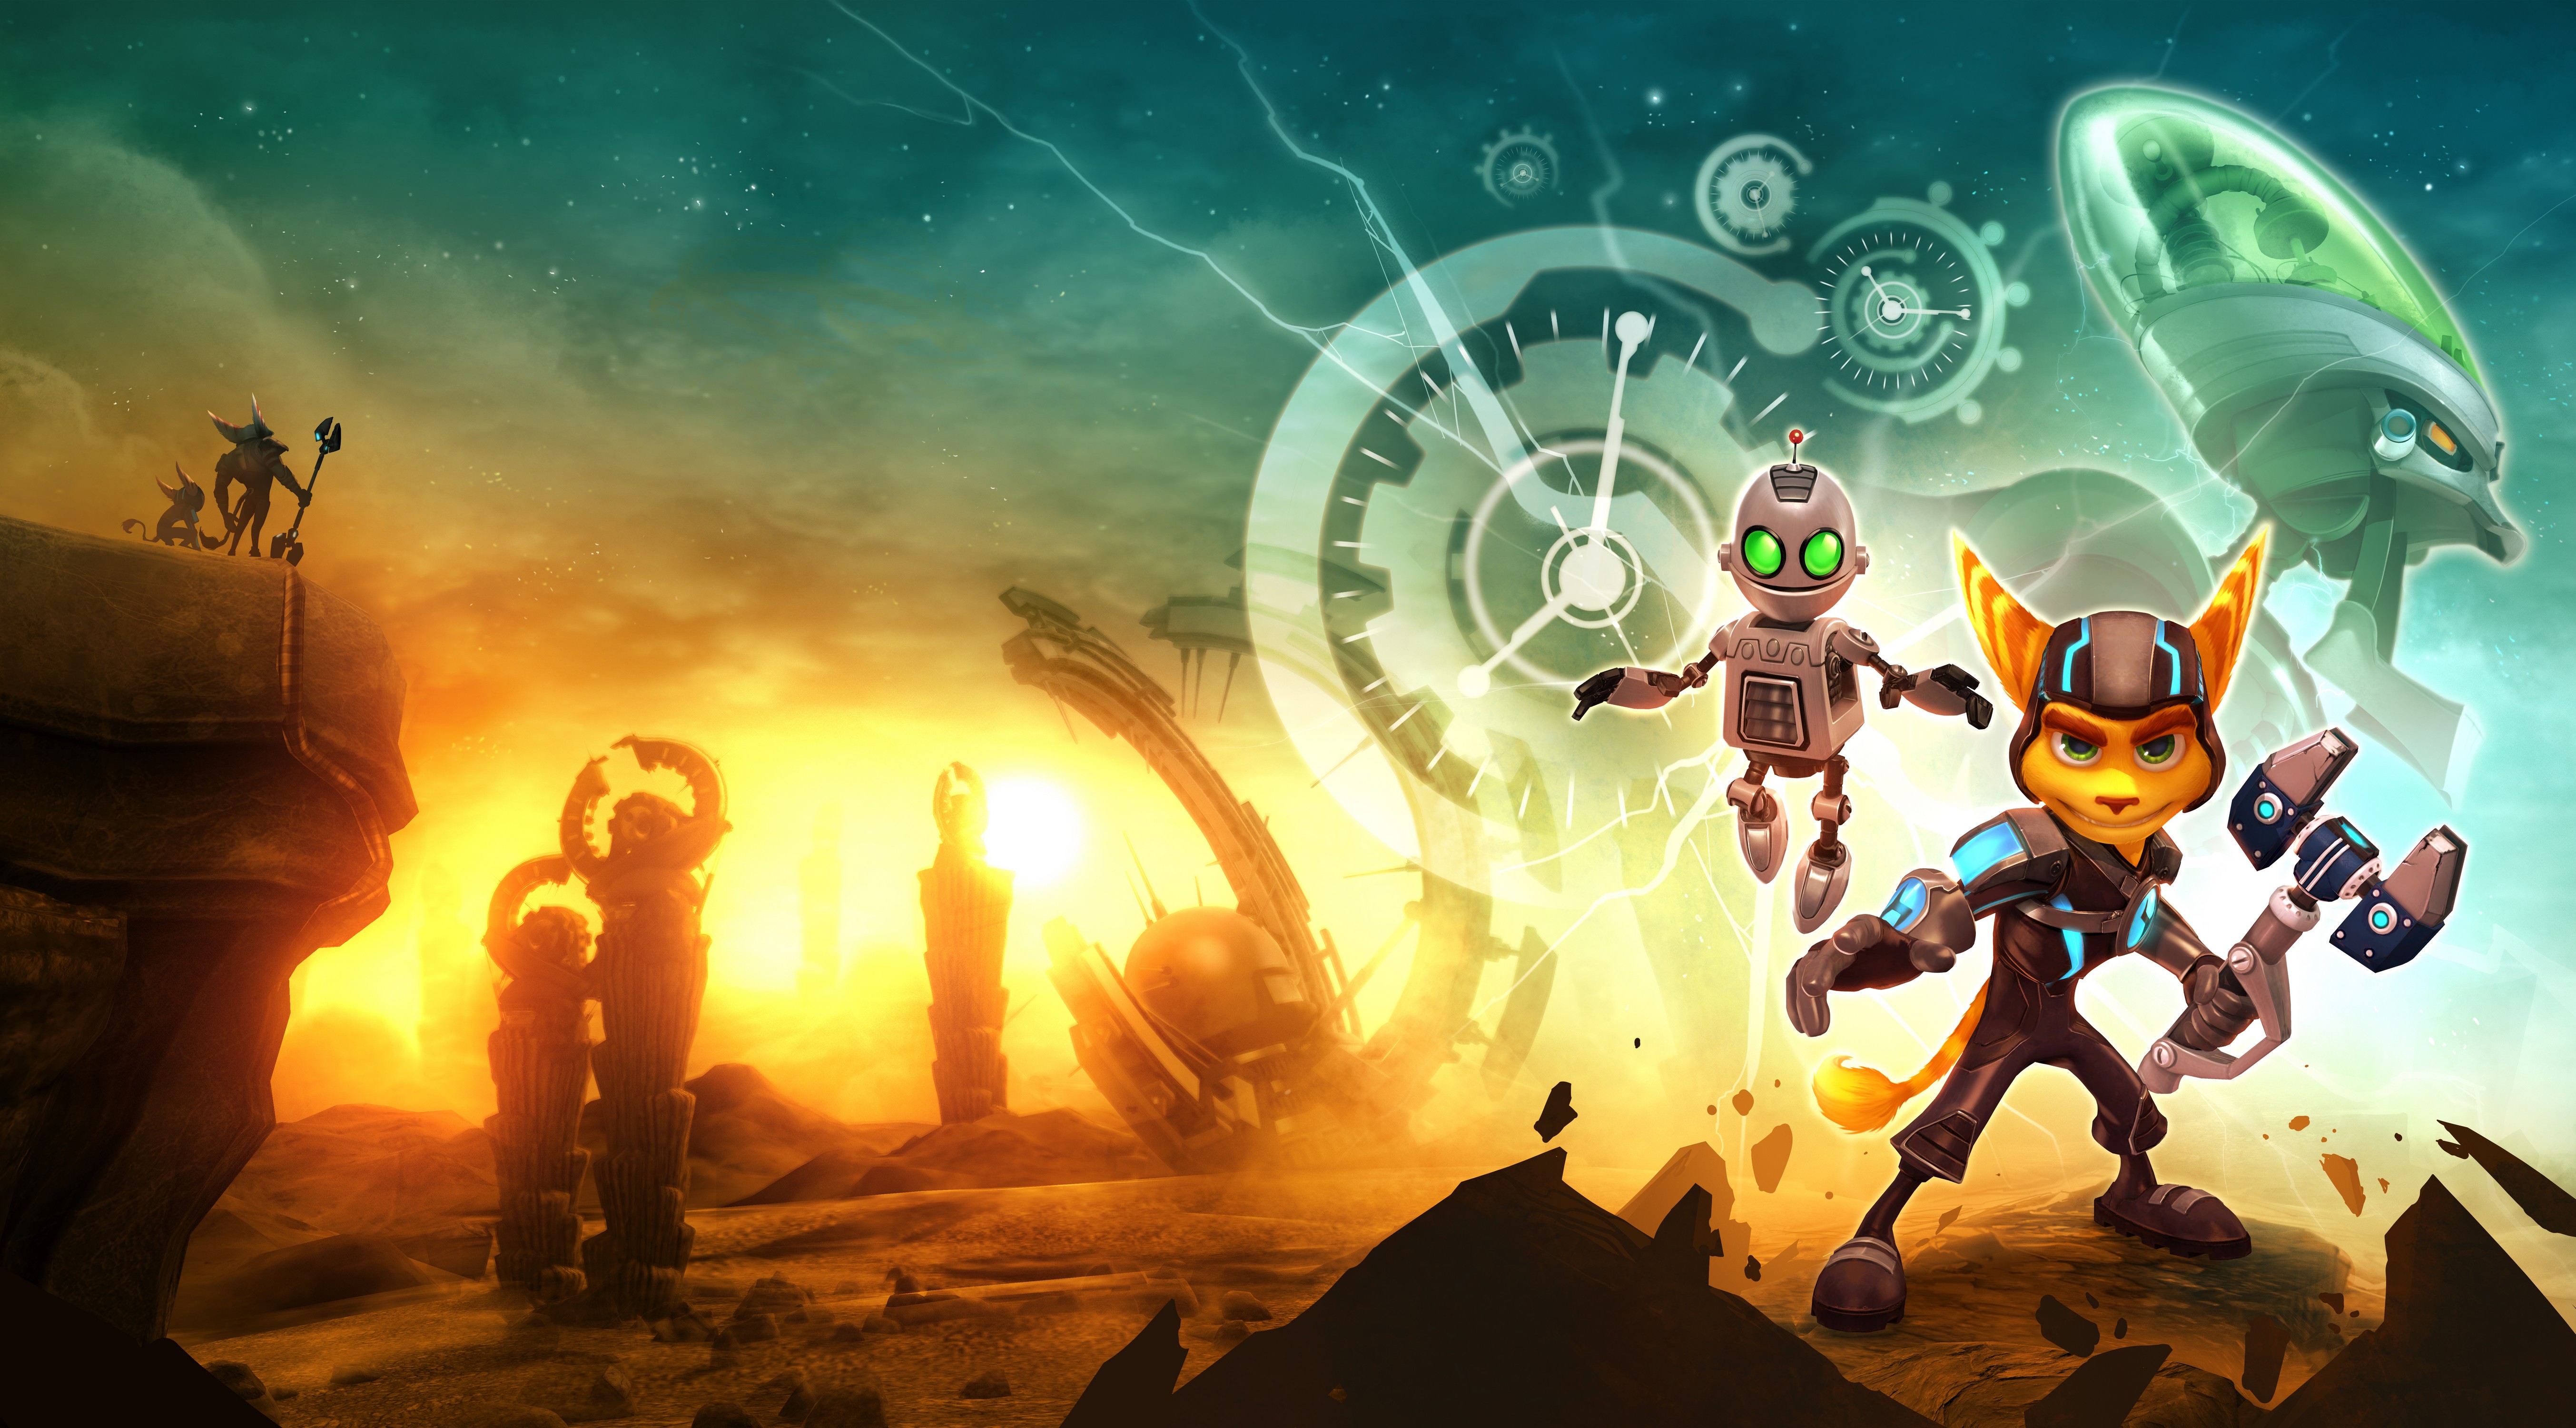 Video Game Ratchet & Clank Future: A Crack in Time Wallpaper